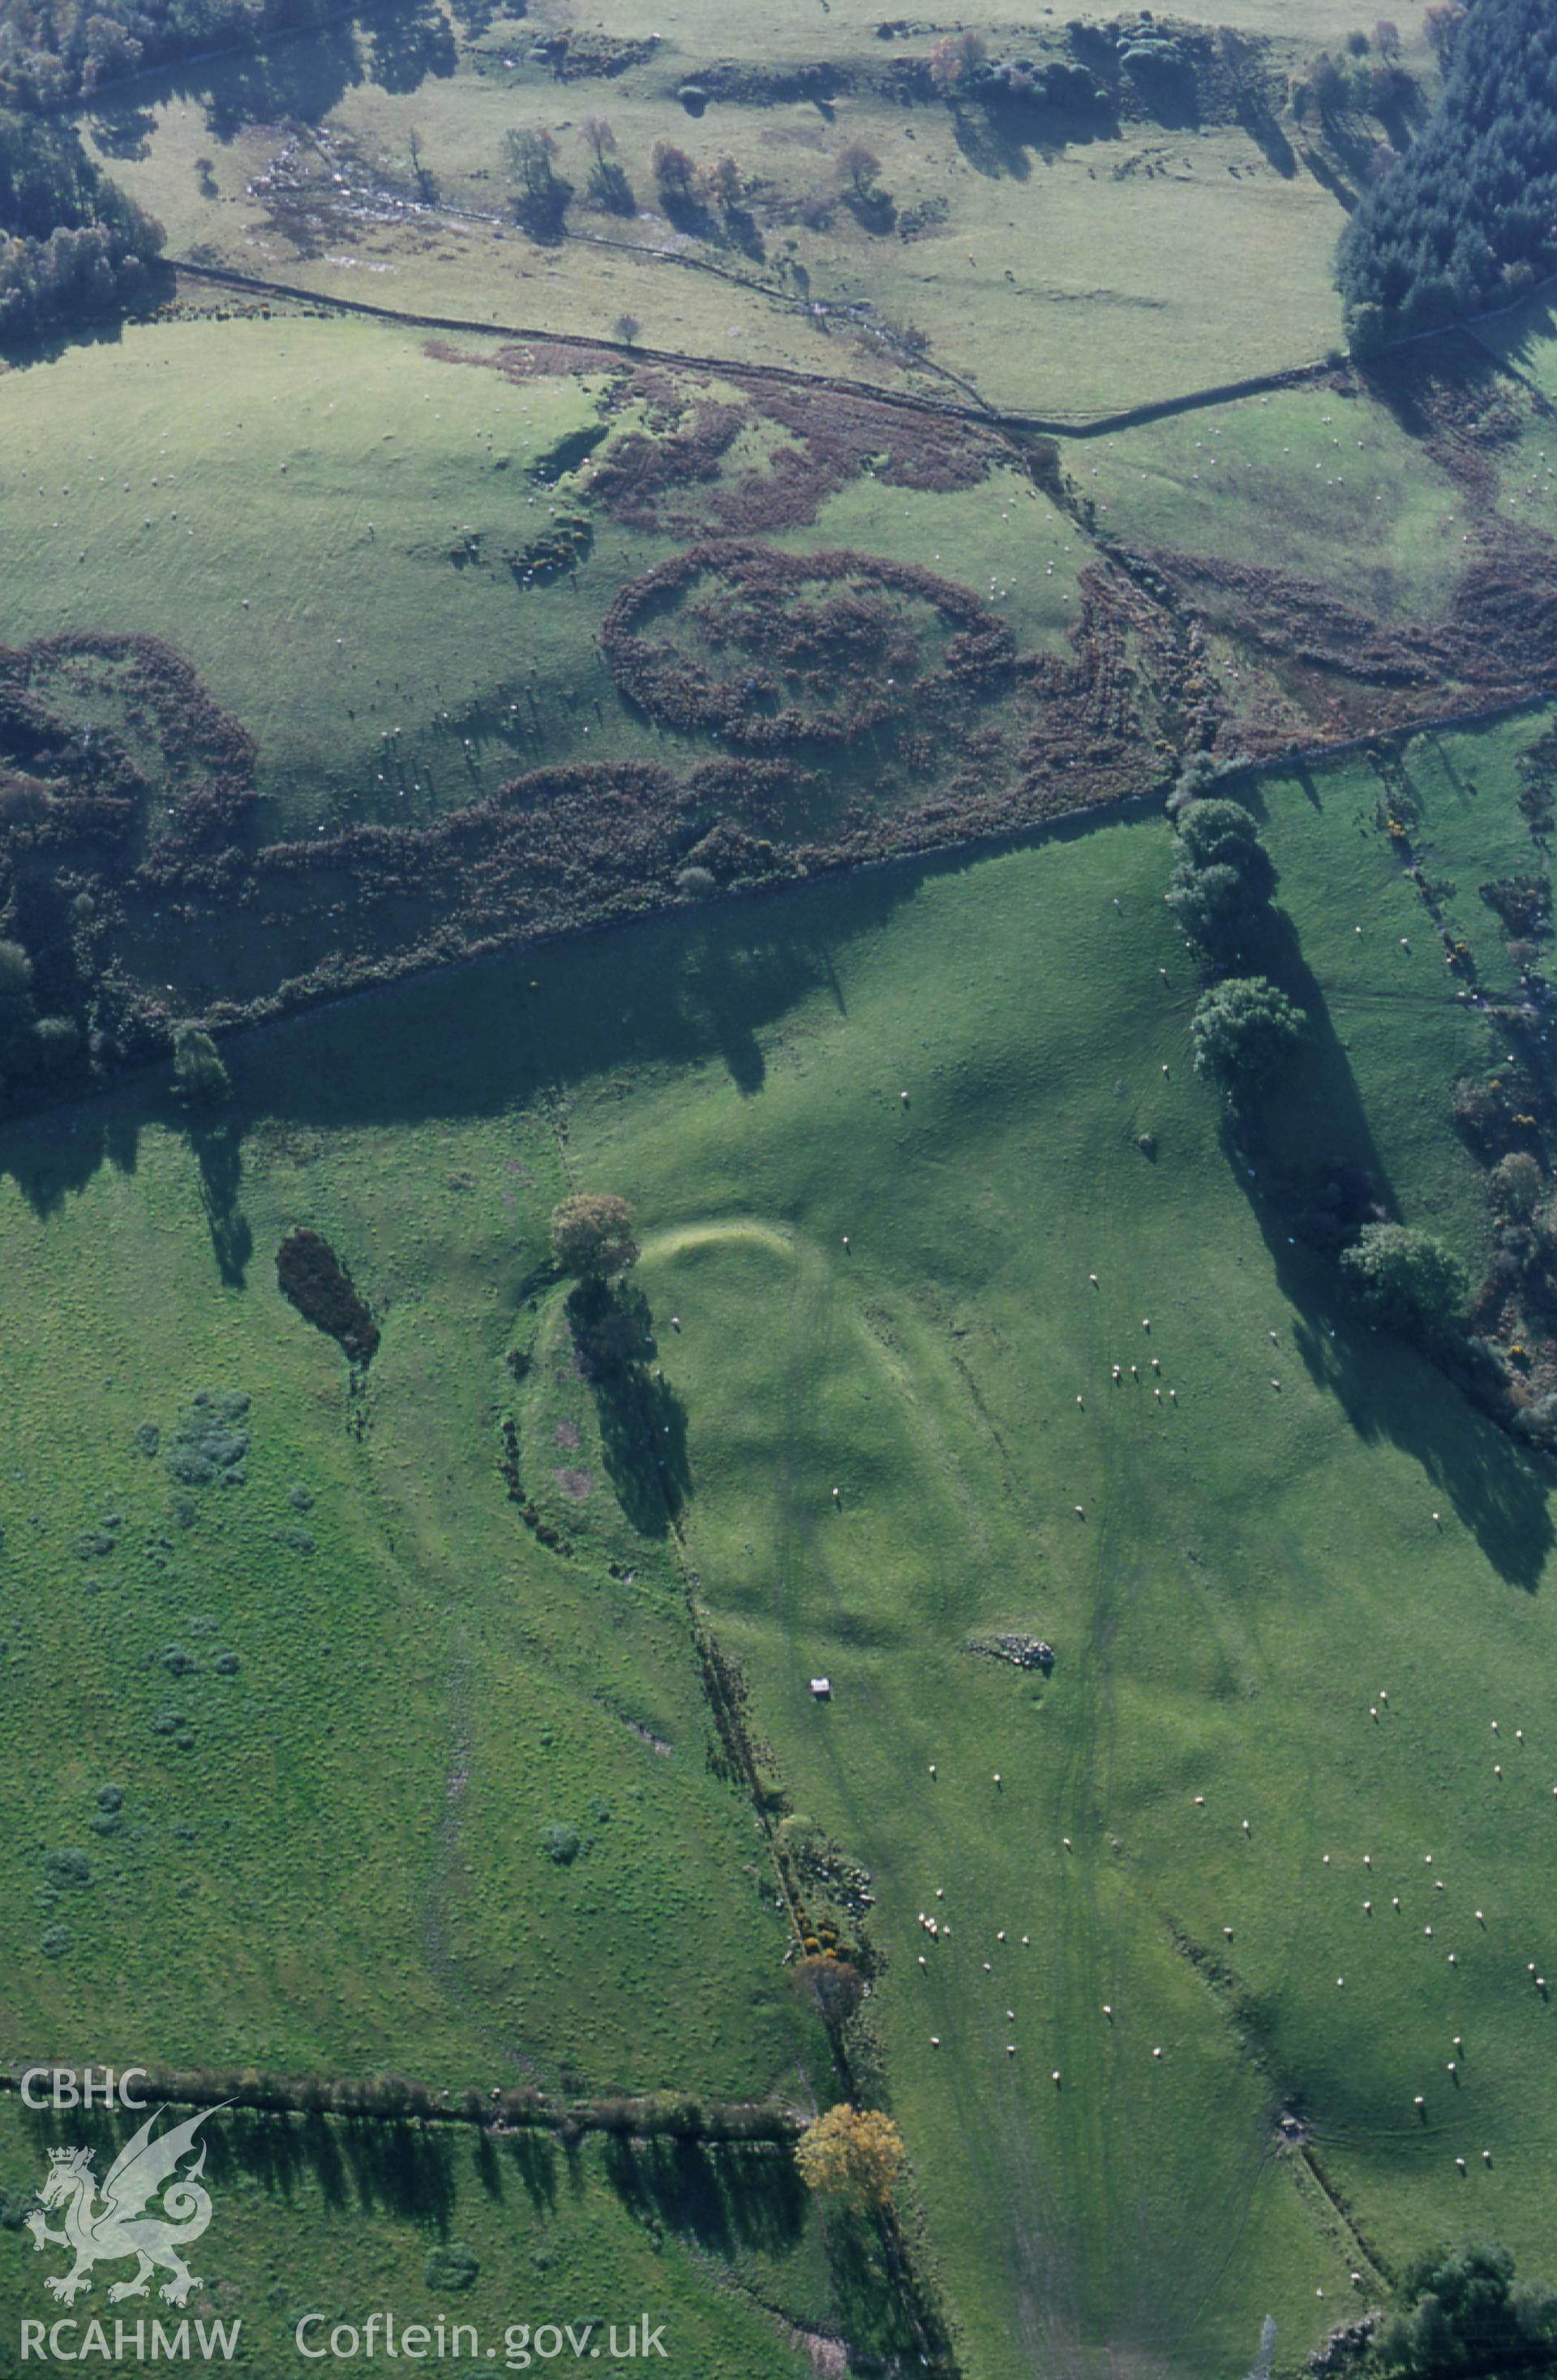 RCAHMW colour slide oblique aerial photograph of Moel Fodig, Enclosure, Corwen, taken by T.G.Driver on the 17/10/2000